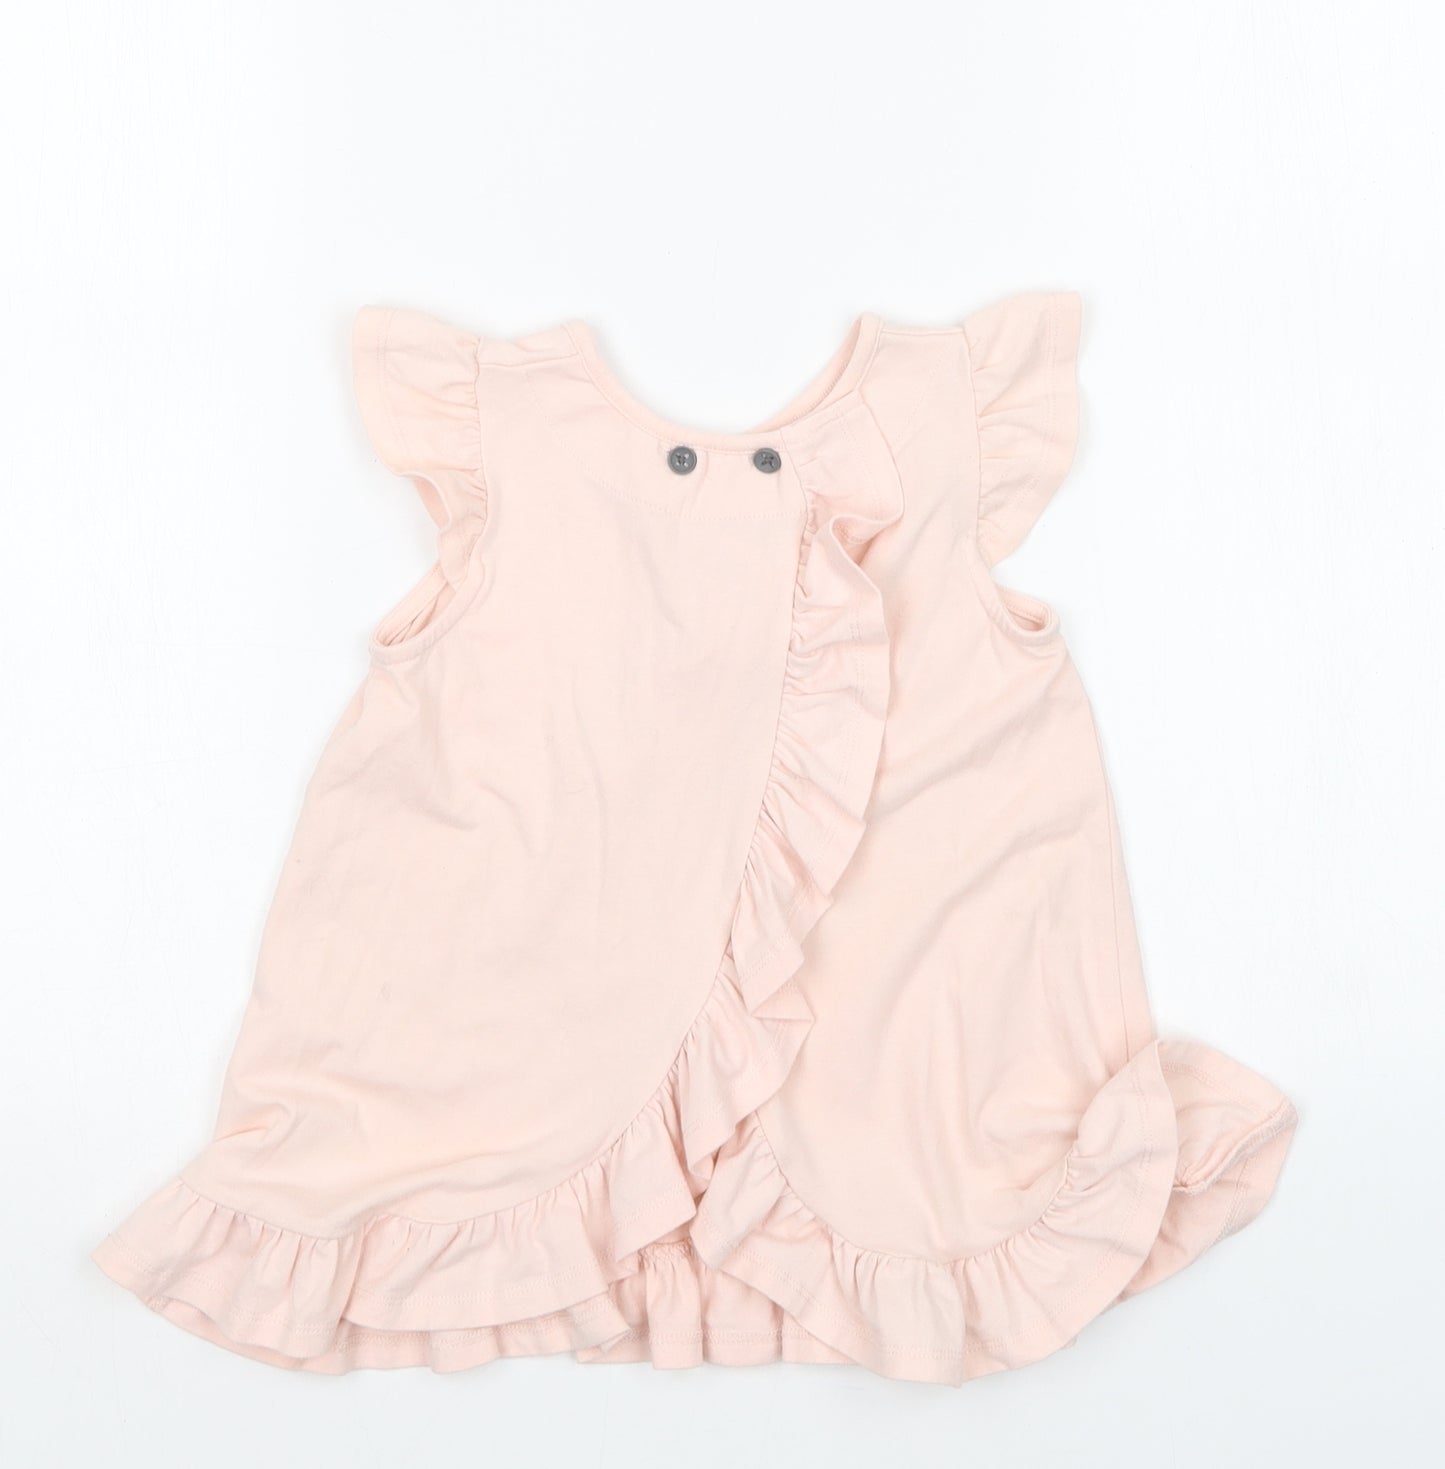 Maggie & Zoe Girls Pink   A-Line  Size 3-4 Years